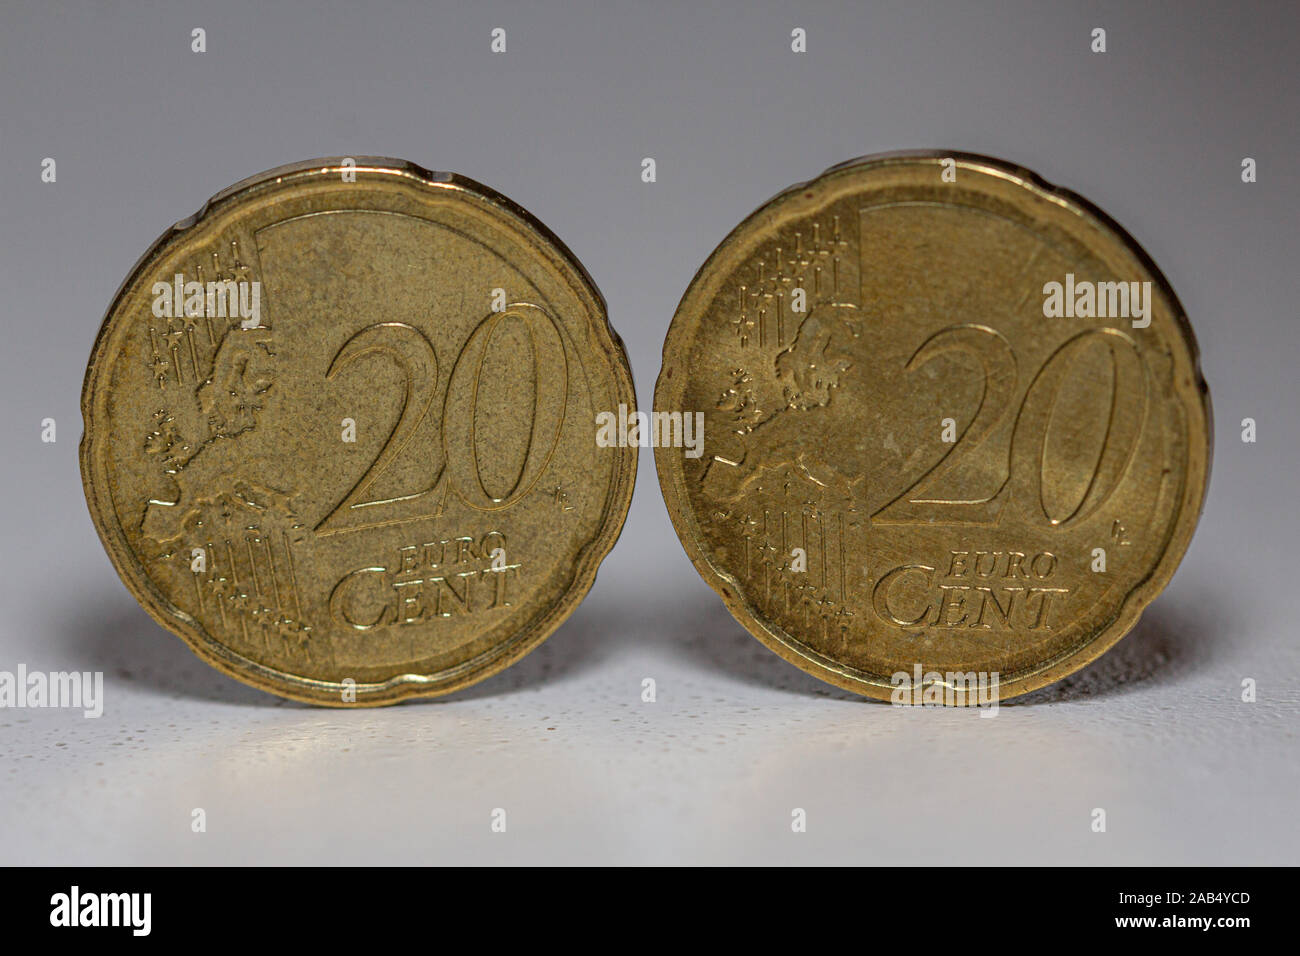 Two 20 Euro Cent Coins showing the year 2020. Stock Photo